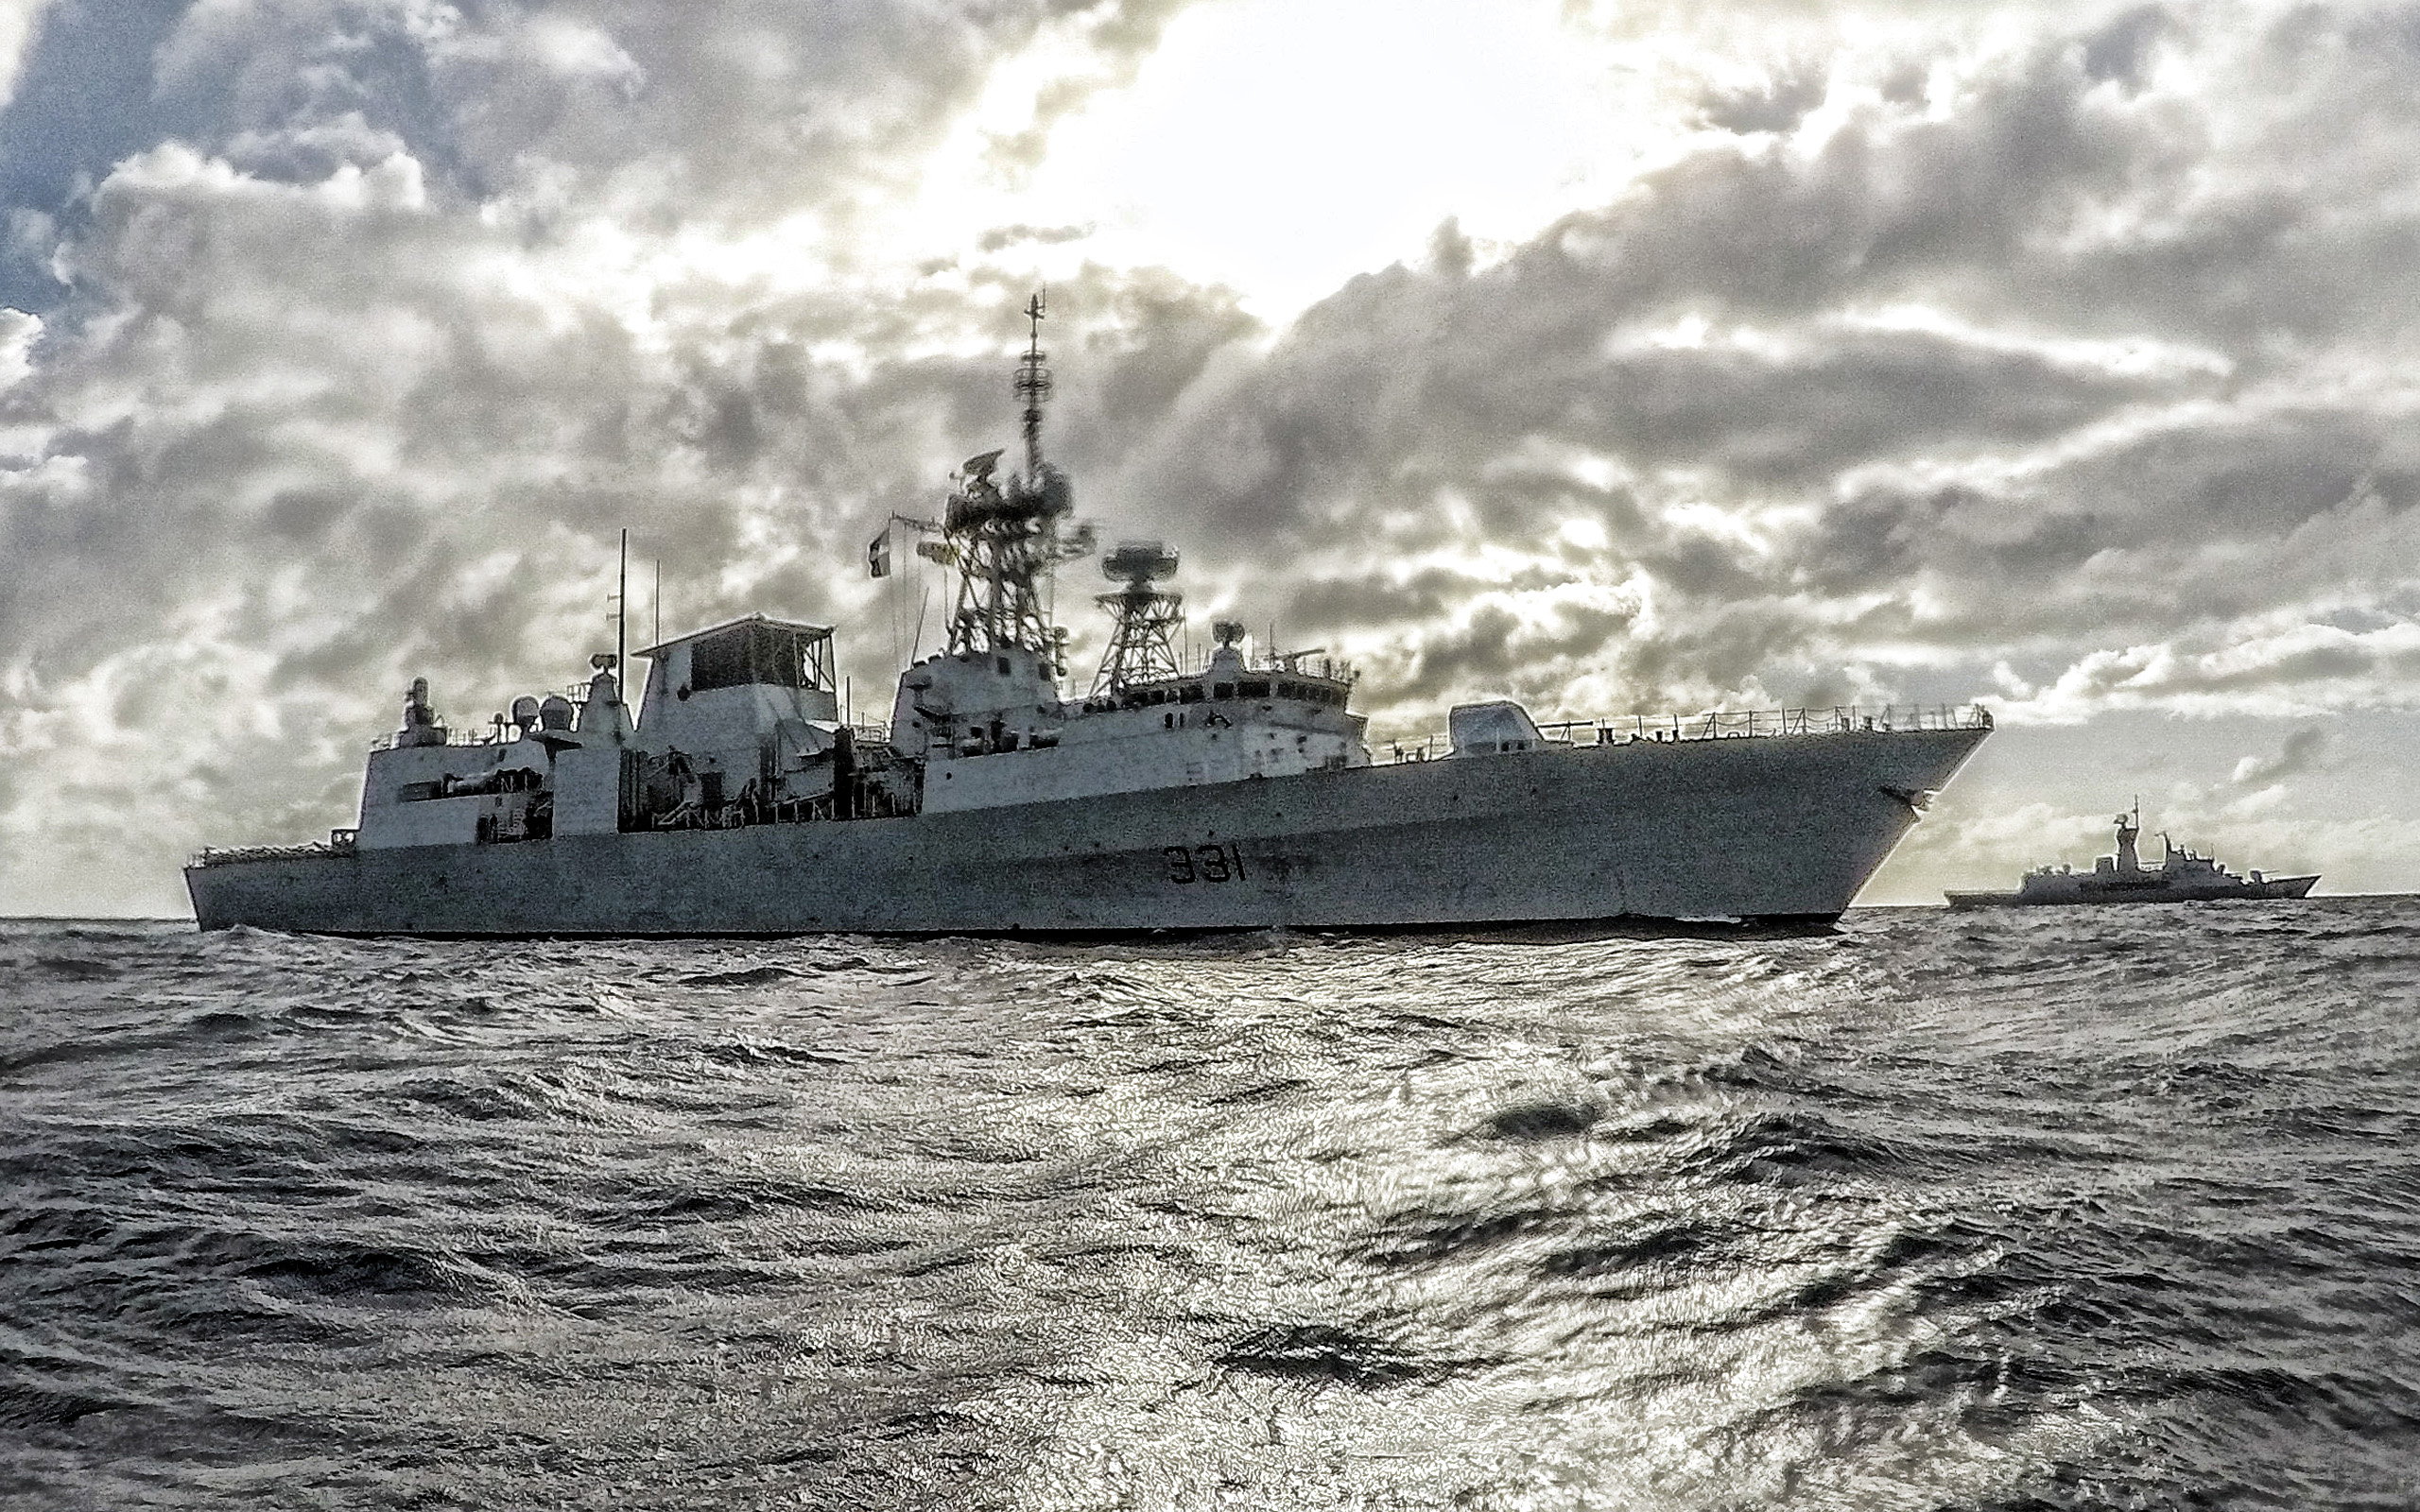 Hmcs Vancouver (Ffh 331) Wallpapers